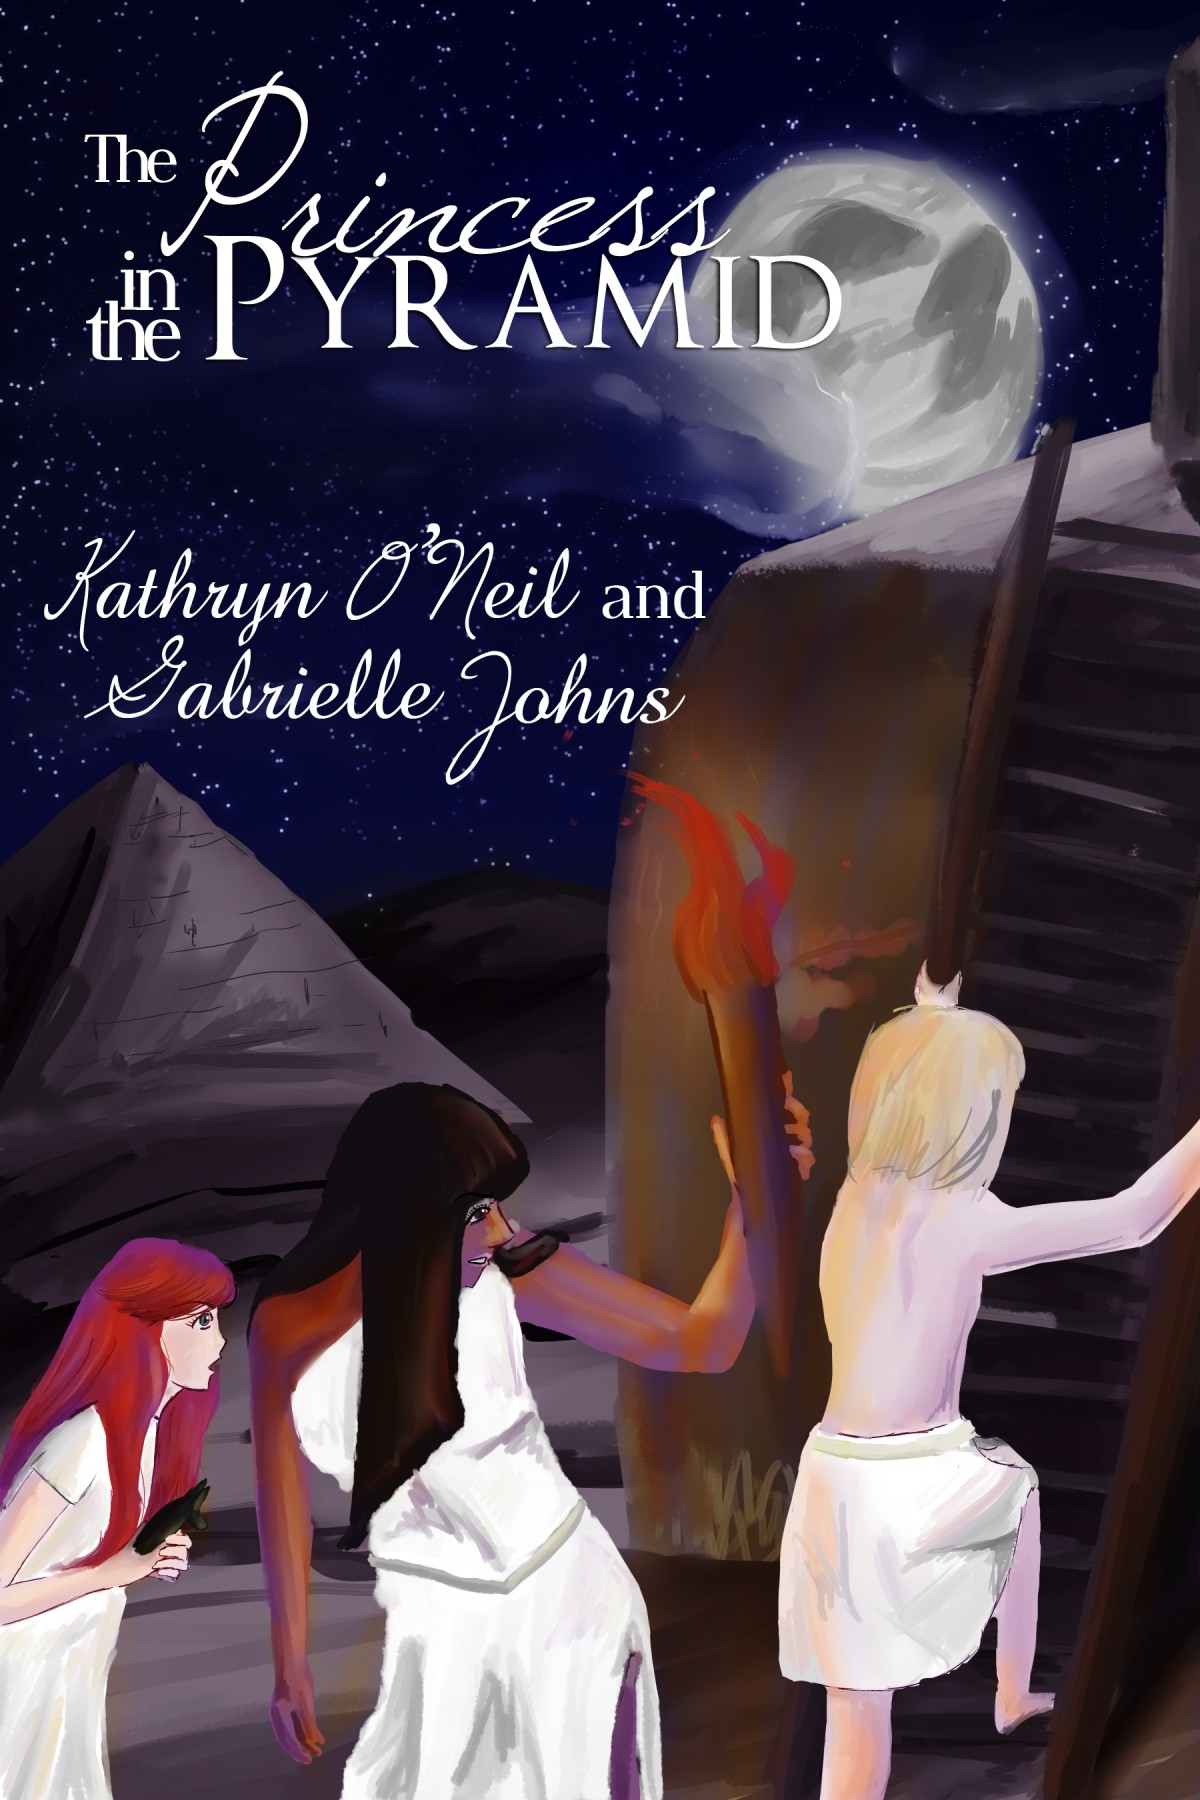 The Princess in the Pyramid by Kathryn O'Neil and Gabrielle Johns